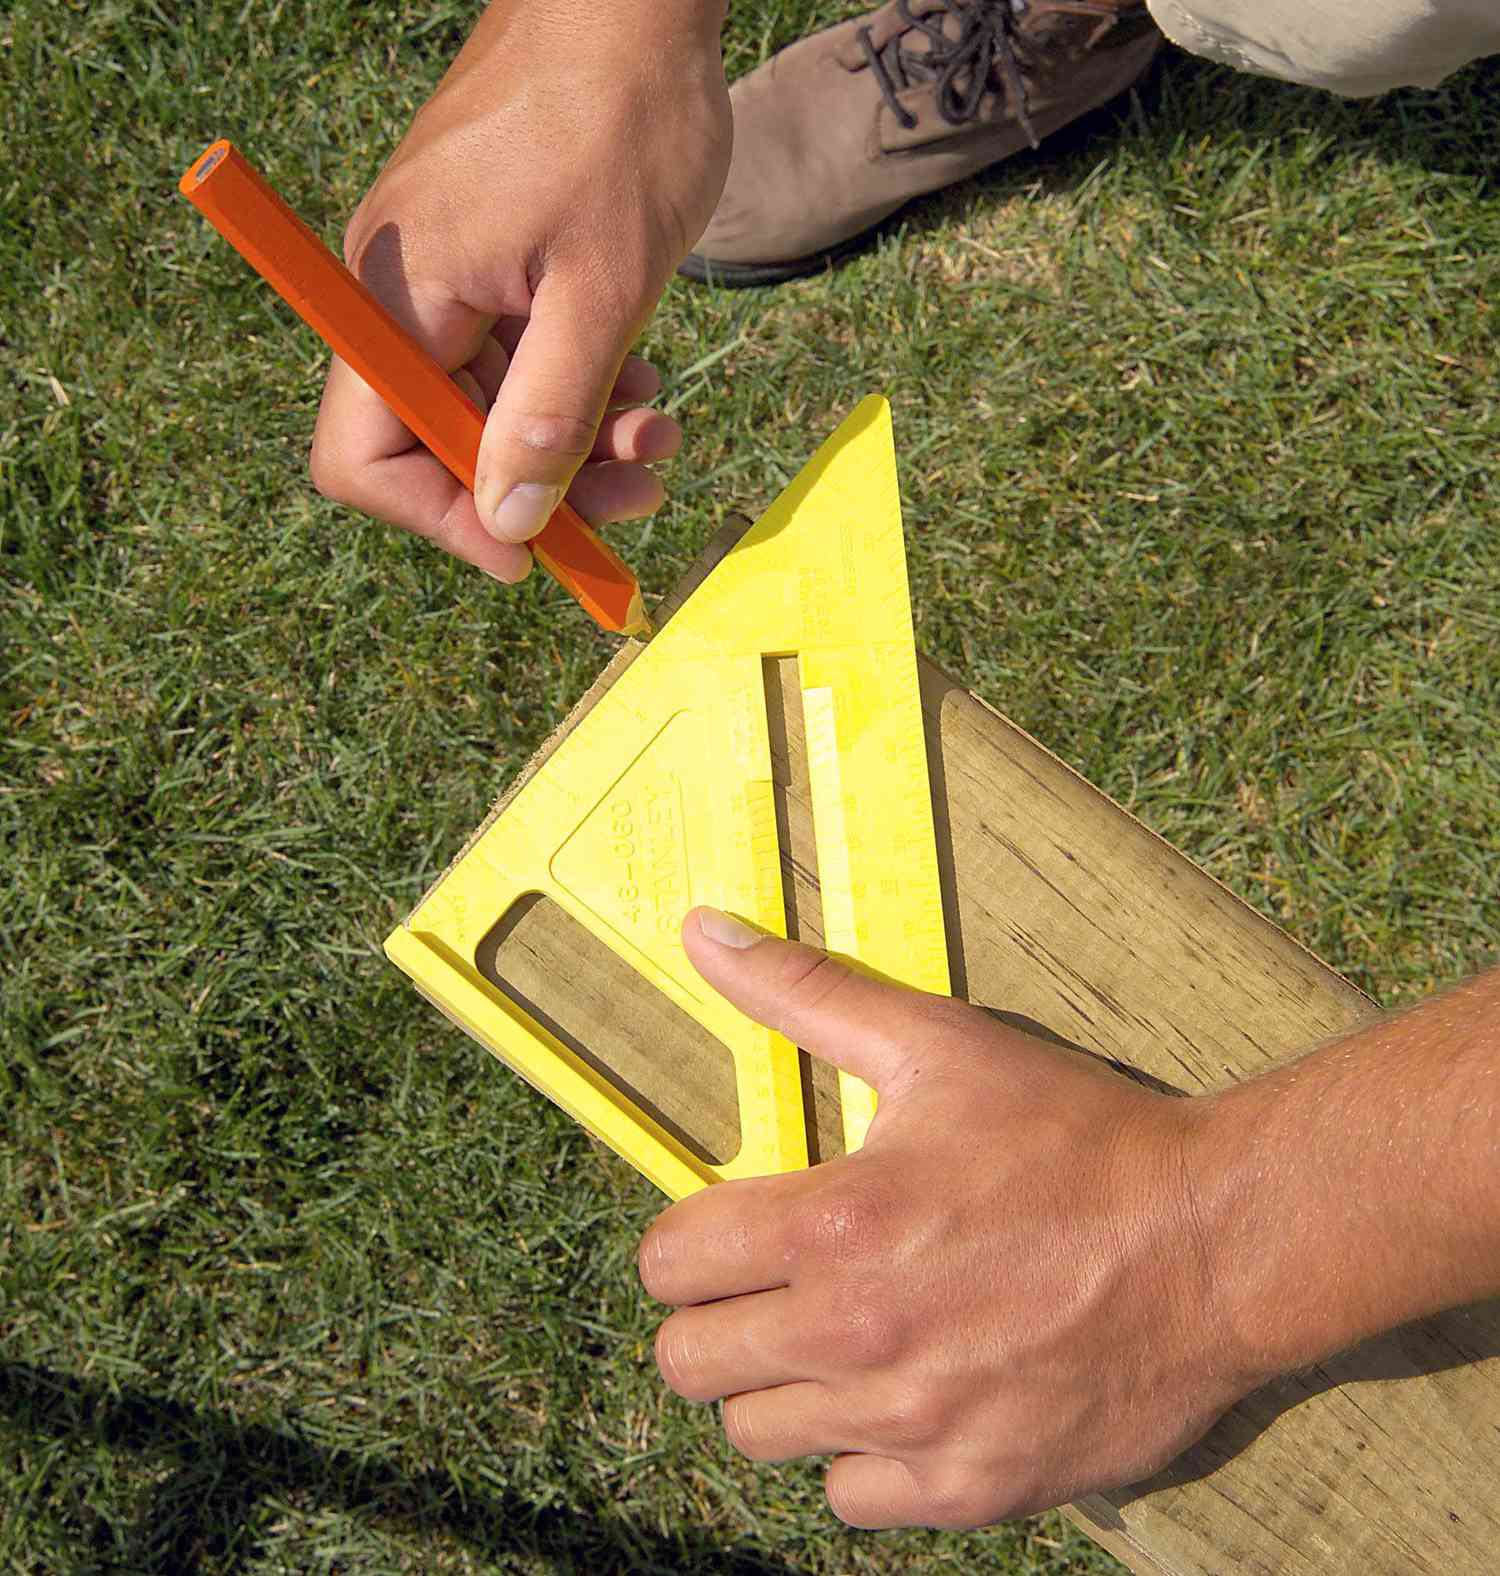 marking wood with pencil and yellow speed square